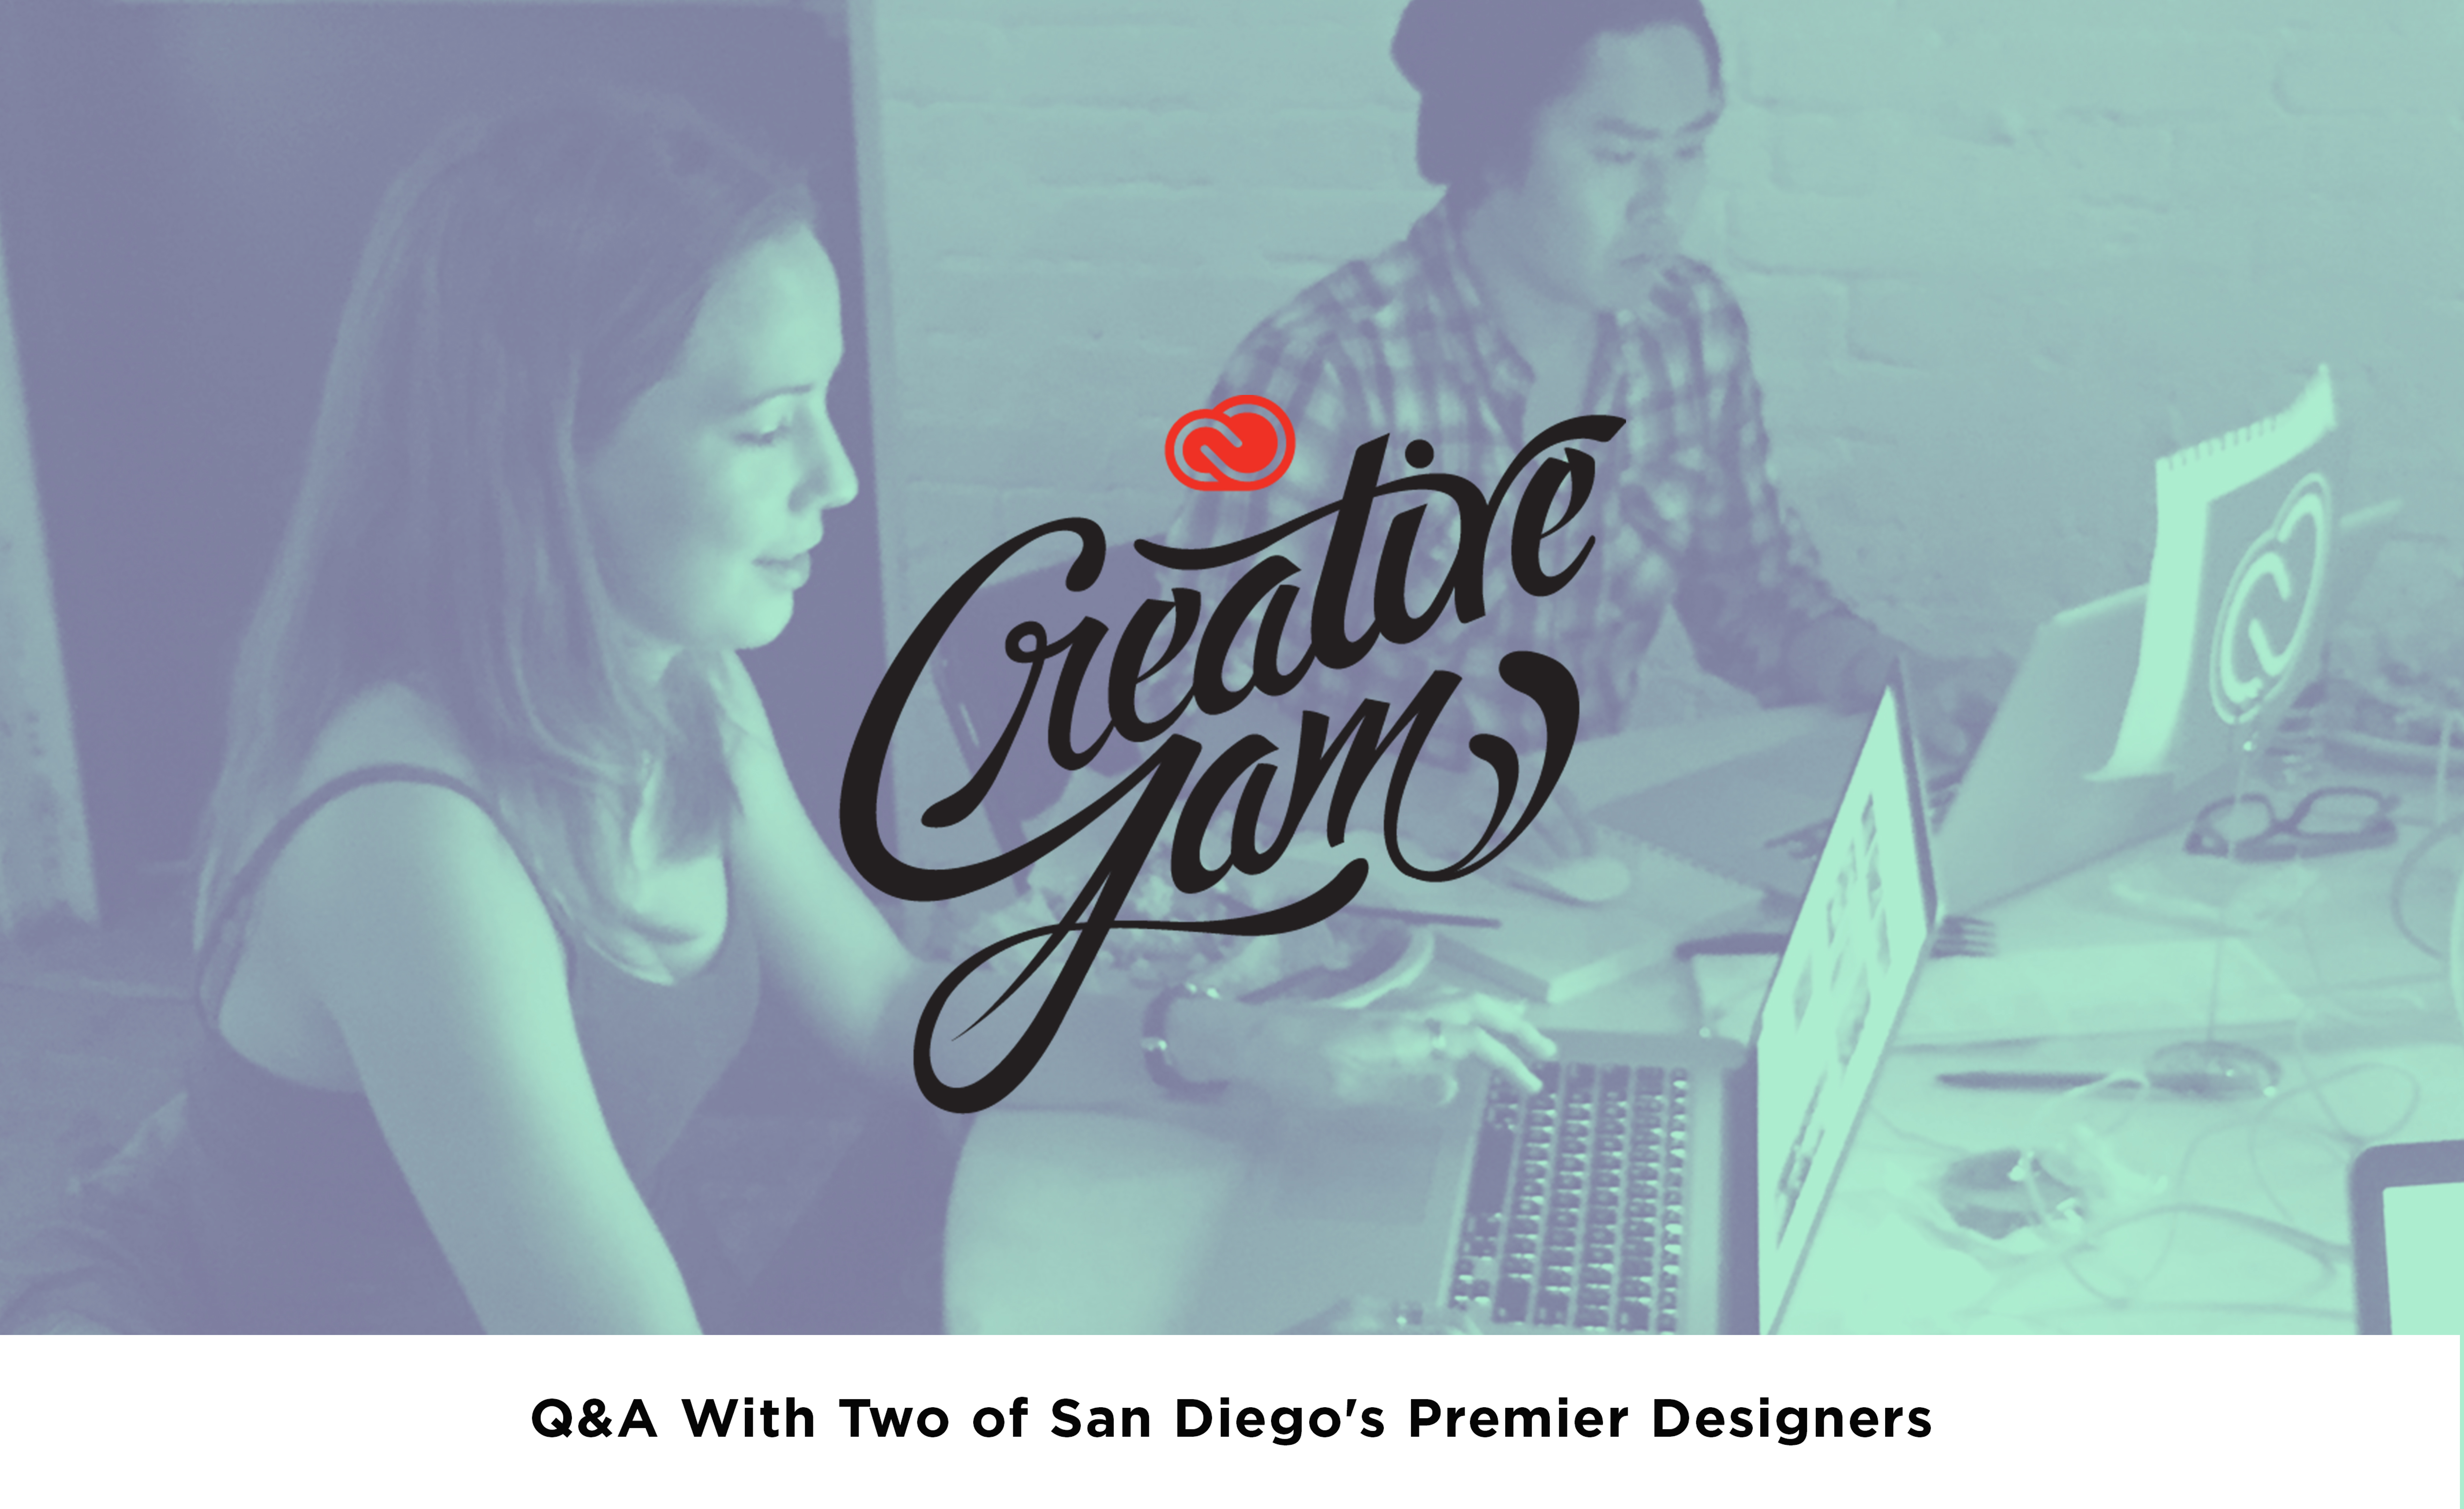 Creative Jam - Q&A with Two of San Diego's Premier Designers